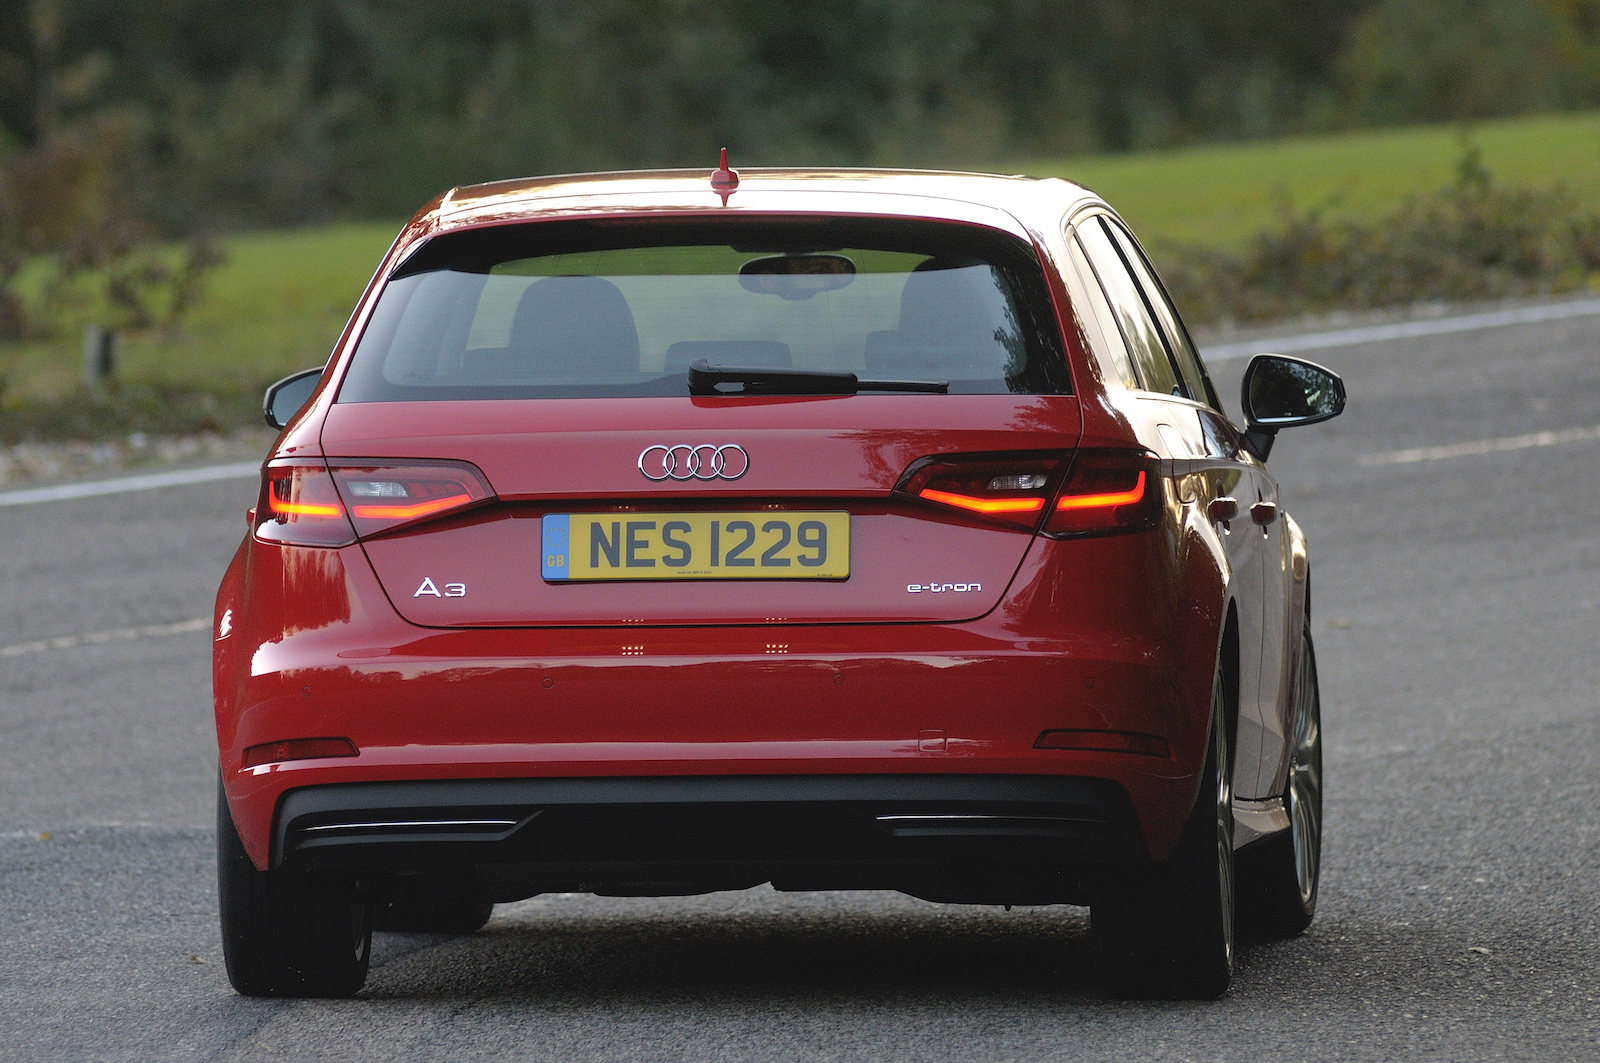 Haarvaten muur Markeer Used Audi A3 e-tron buying guide | DrivingElectric